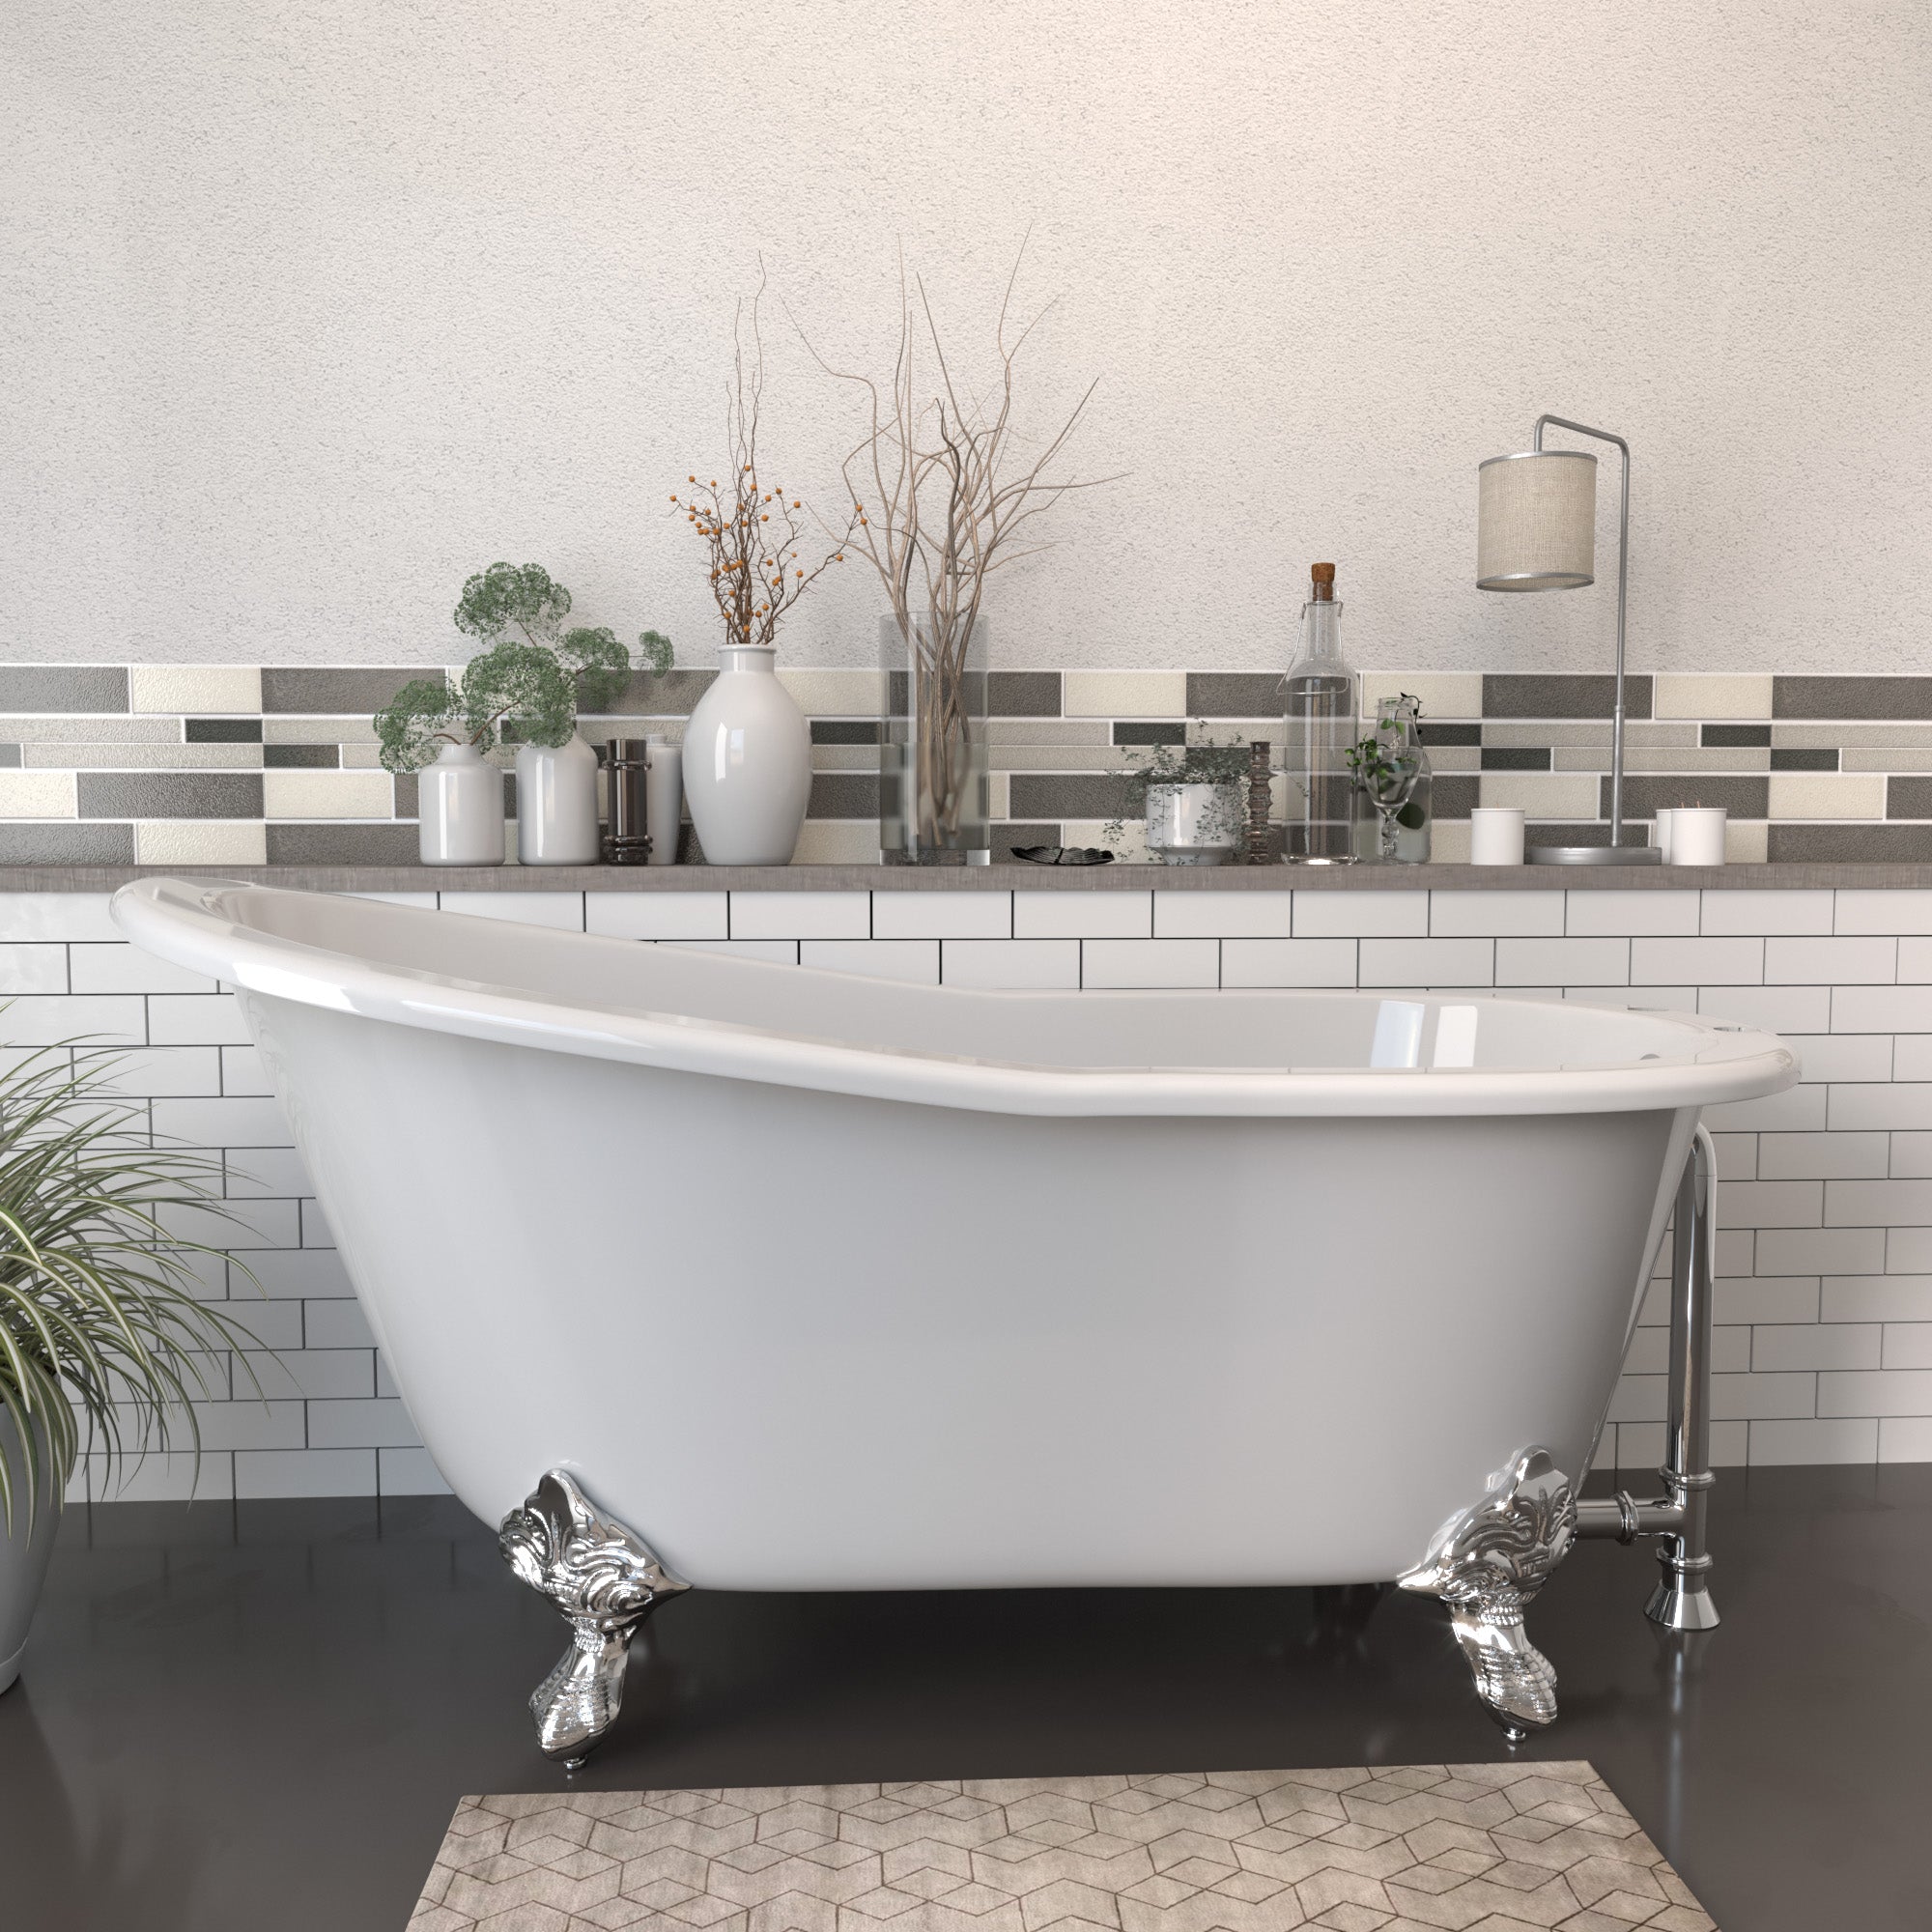 Cambridge Plumbing Cast Iron Slipper Clawfoot Tub (Porcelain enamel interior and white paint exterior) Brushed nickel finish ball and claw feet - 61" X 30" ST61-DH - Vital Hydrotherapy